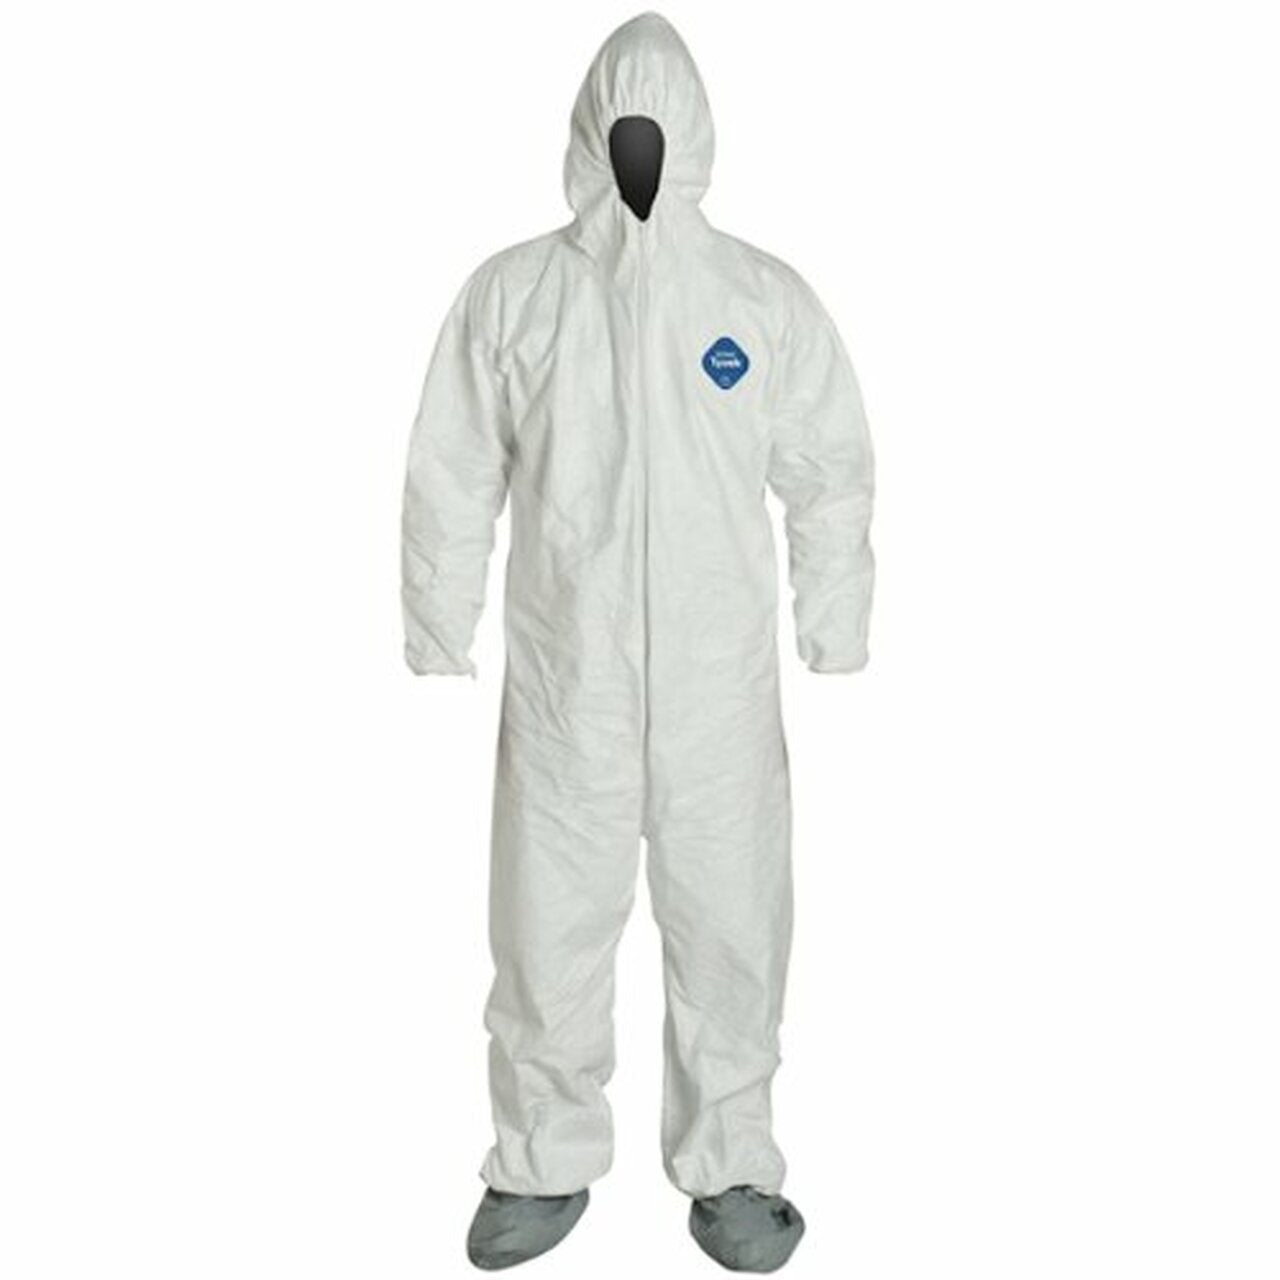 Dupont - Tyvek Disposable Coveralls with Hood and Boots